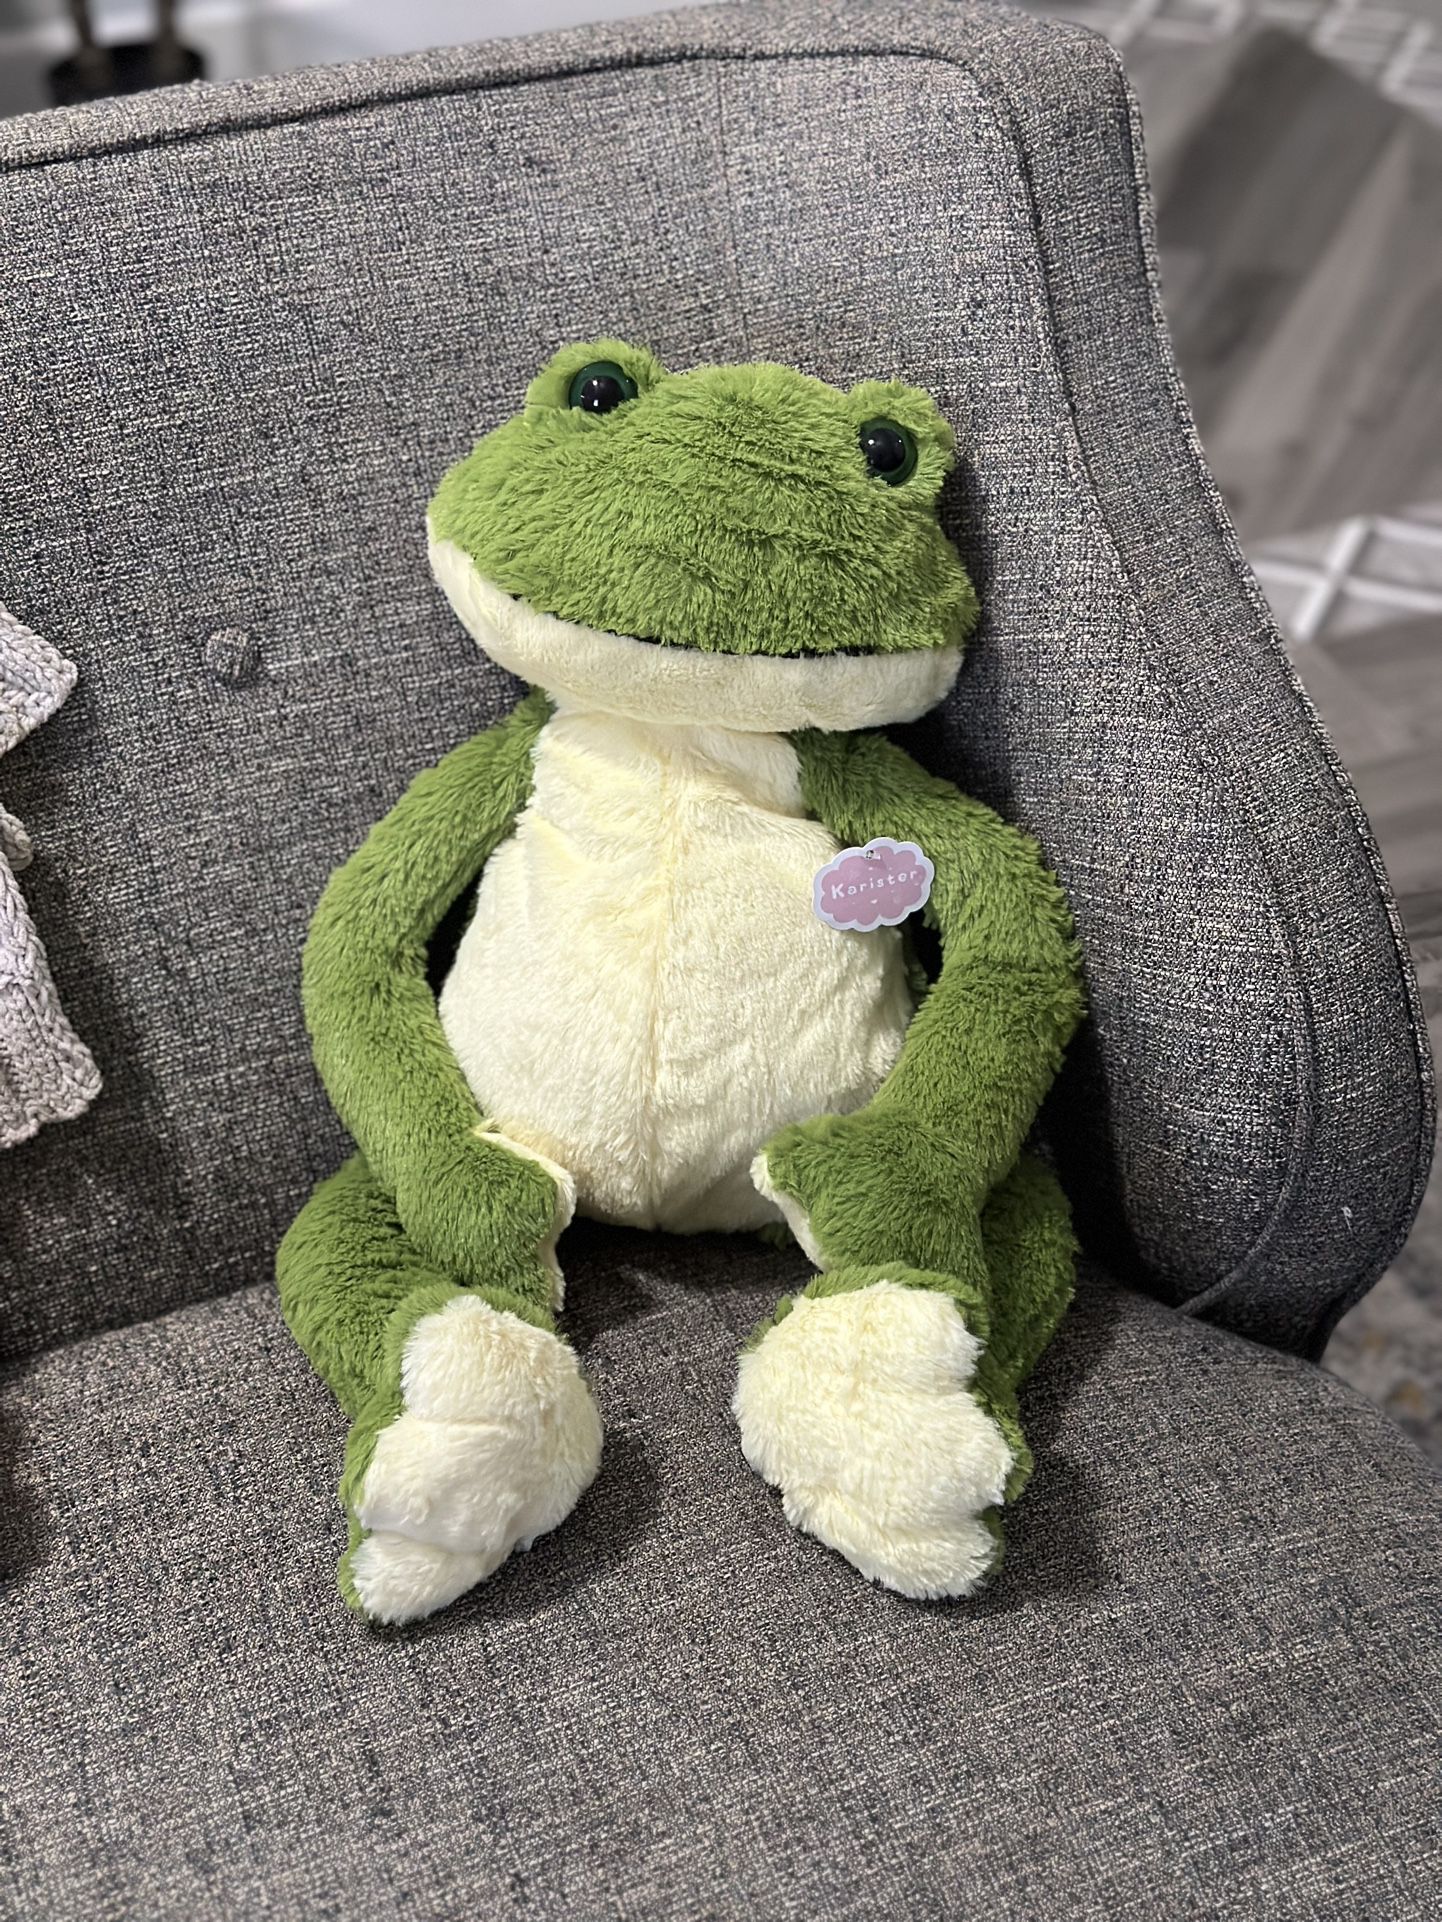 Large Frog Stuffed Animal- NEW with tags. 